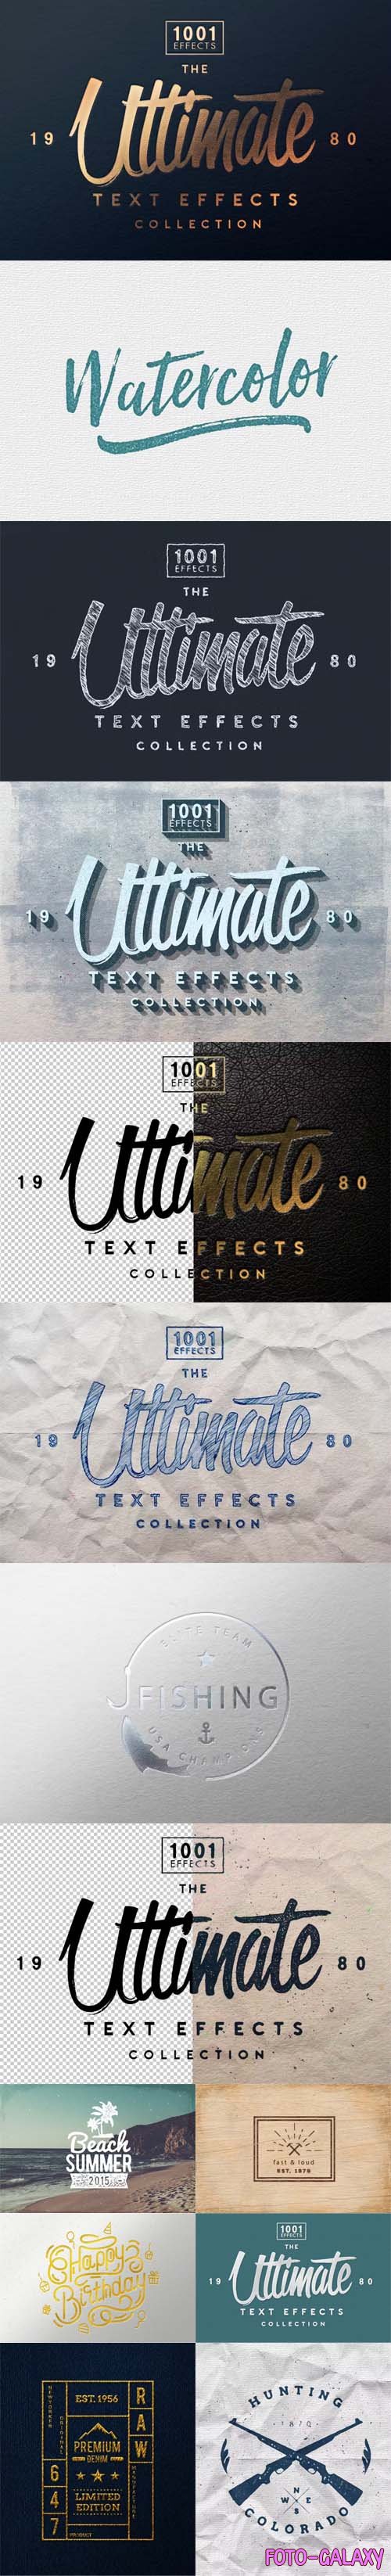 The Ultimate 1001 Text Effects